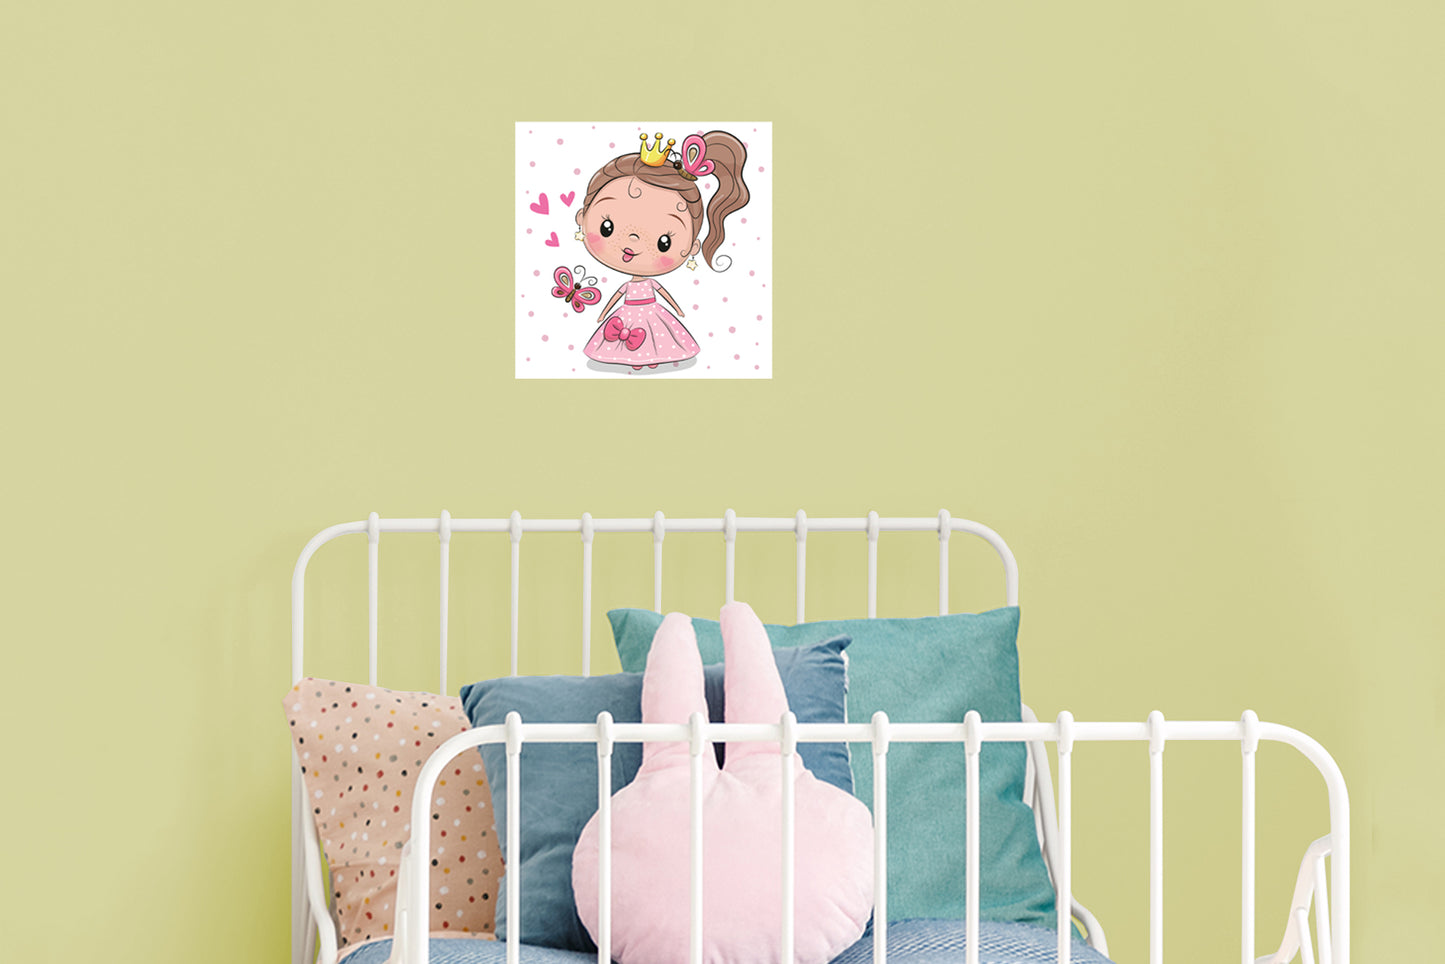 Nursery Princess:  Butterfly Mural        -   Removable Wall   Adhesive Decal